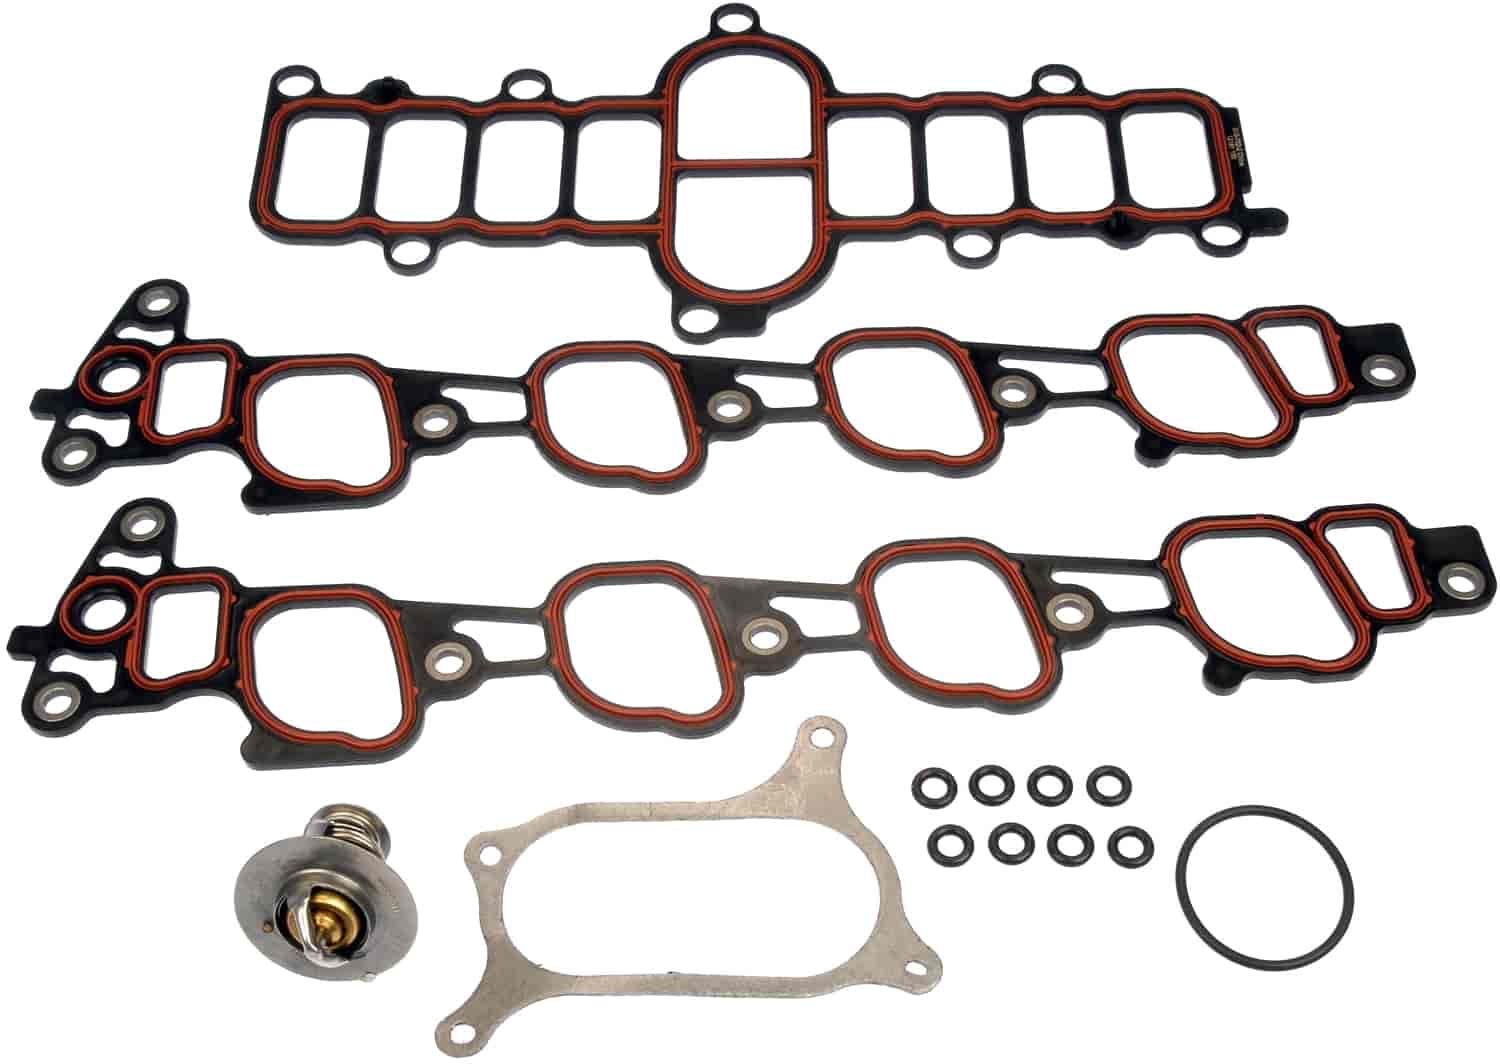 Gasket Kit Includes Plenum And Manifold Gaskets -